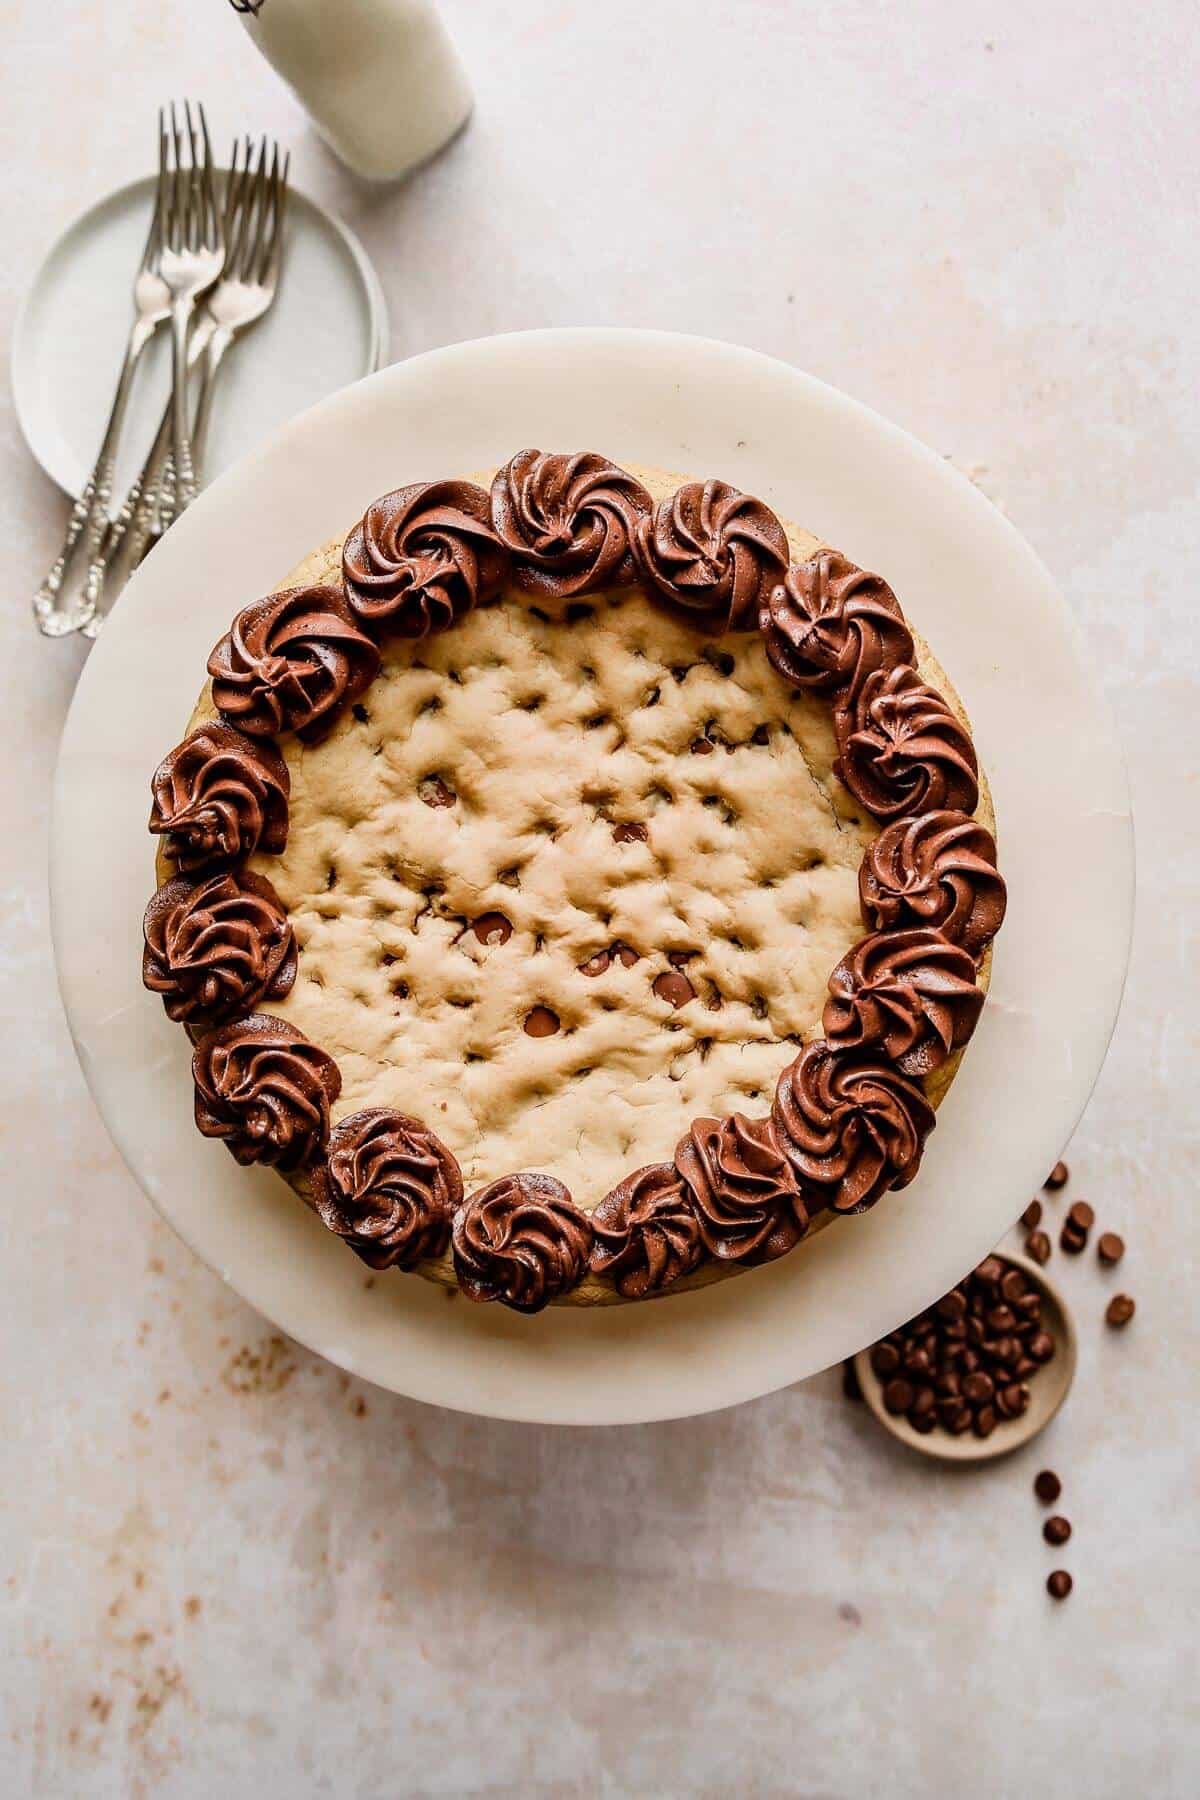 a photo of a whole cookie dough cake piped with chocolate buttercream frosting on a white plate with four silver forks resting on a plate next to it